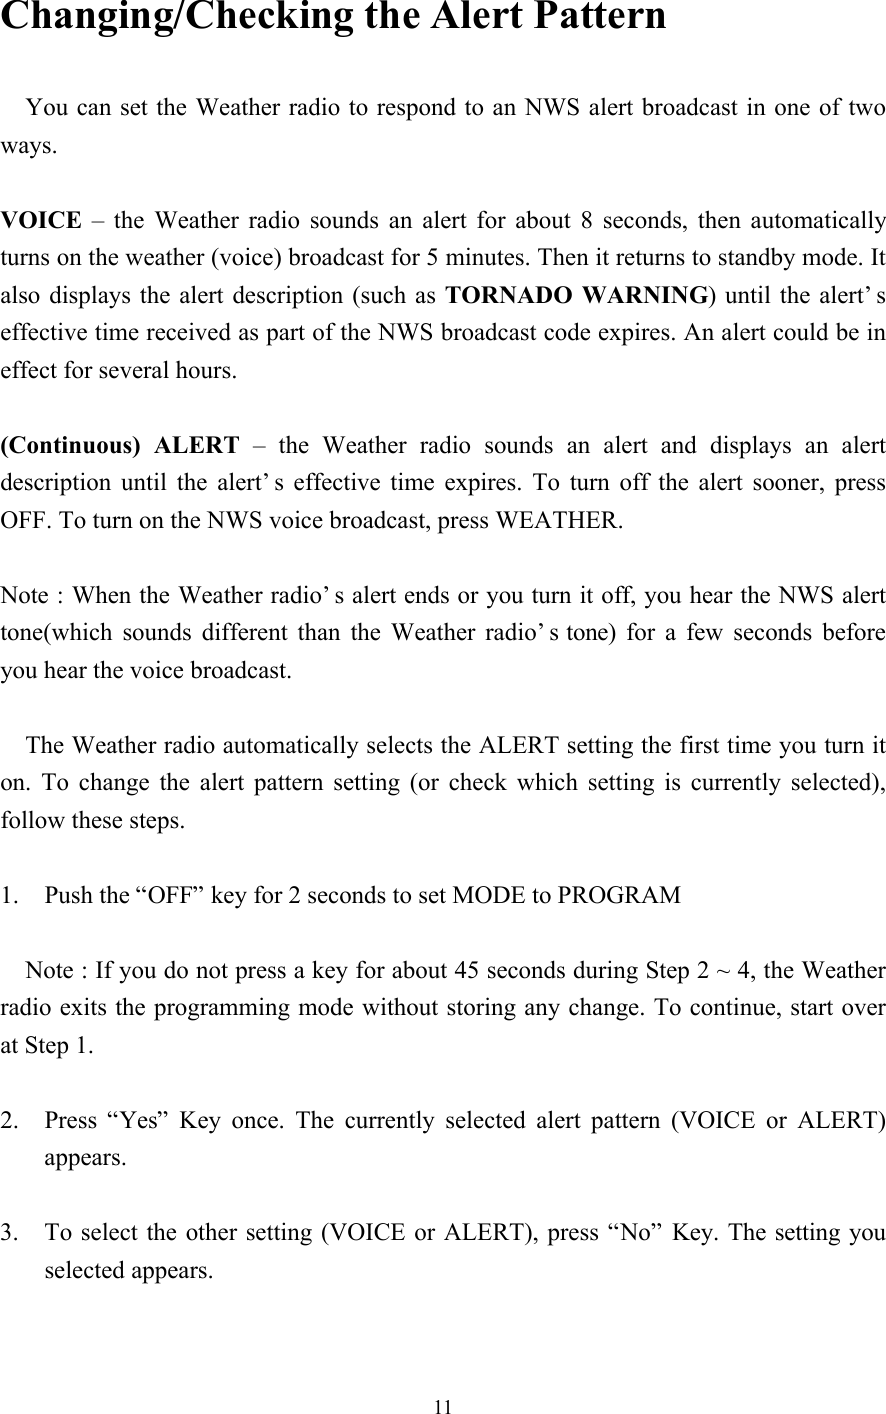 11Changing/Checking the Alert Pattern  You can set the Weather radio to respond to an NWS alert broadcast in one of twoways.VOICE – the Weather radio sounds an alert for about 8 seconds, then automaticallyturns on the weather (voice) broadcast for 5 minutes. Then it returns to standby mode. Italso displays the alert description (such as TORNADO WARNING) until the alert’seffective time received as part of the NWS broadcast code expires. An alert could be ineffect for several hours.(Continuous) ALERT  – the Weather radio sounds an alert and displays an alertdescription until the alert’s effective time expires. To turn off the alert sooner, pressOFF. To turn on the NWS voice broadcast, press WEATHER.Note : When the Weather radio’s alert ends or you turn it off, you hear the NWS alerttone(which sounds different than the Weather radio’s tone) for a few seconds beforeyou hear the voice broadcast.The Weather radio automatically selects the ALERT setting the first time you turn iton. To change the alert pattern setting (or check which setting is currently selected),follow these steps.1. Push the “OFF” key for 2 seconds to set MODE to PROGRAMNote : If you do not press a key for about 45 seconds during Step 2 ~ 4, the Weatherradio exits the programming mode without storing any change. To continue, start overat Step 1.2. Press “Yes” Key once. The currently selected alert pattern (VOICE or ALERT)appears.3. To select the other setting (VOICE or ALERT), press “No” Key. The setting youselected appears.